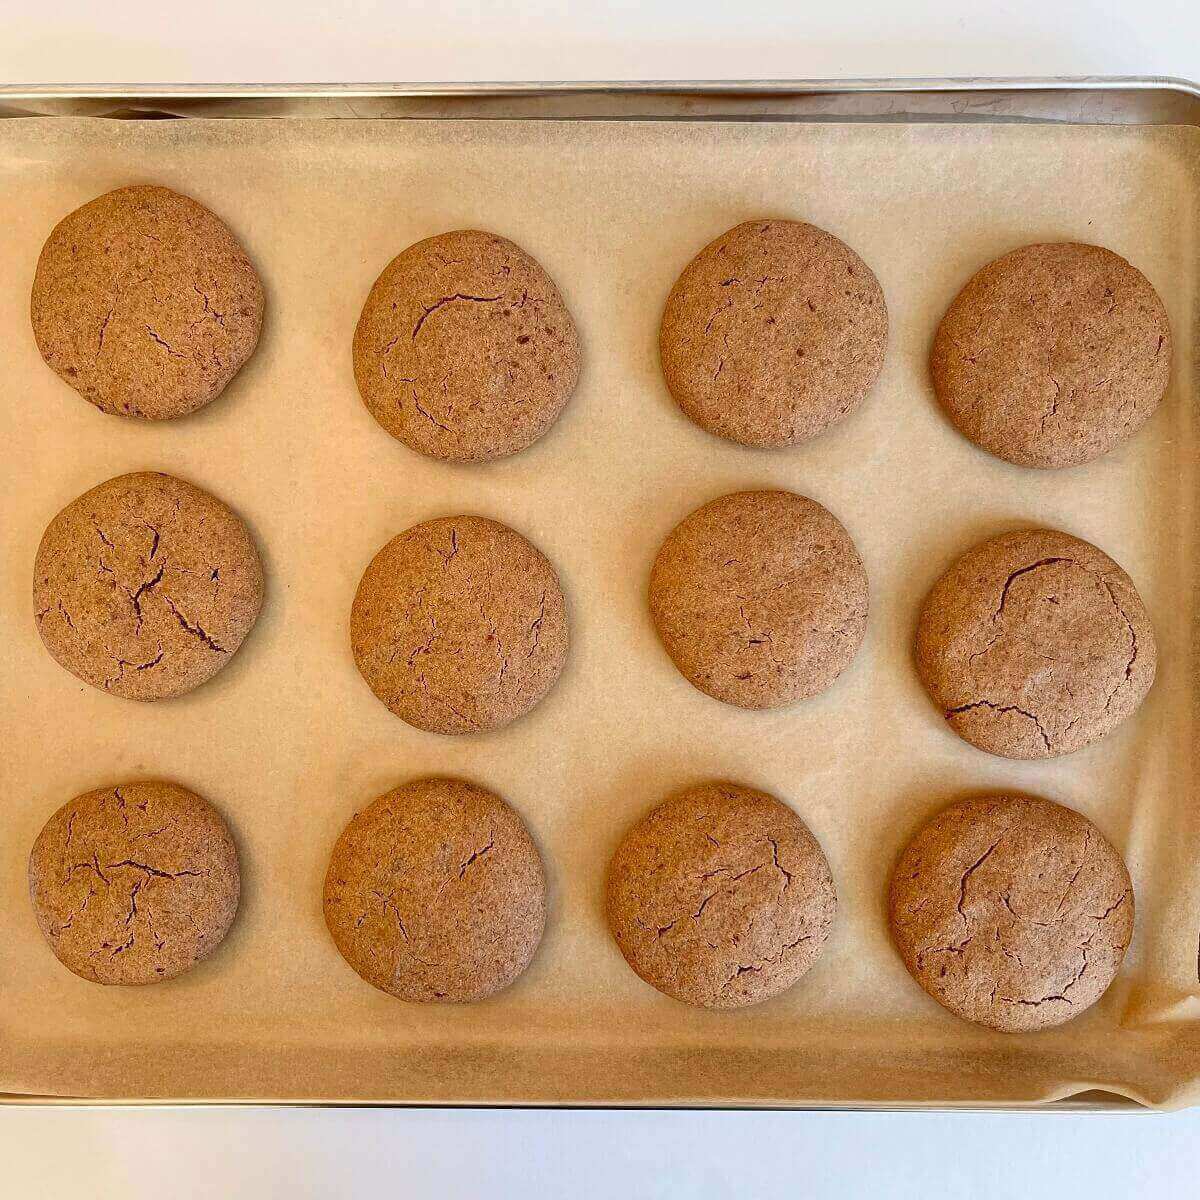 Twelve beige cookies on a sheet pan lined with parchment paper.